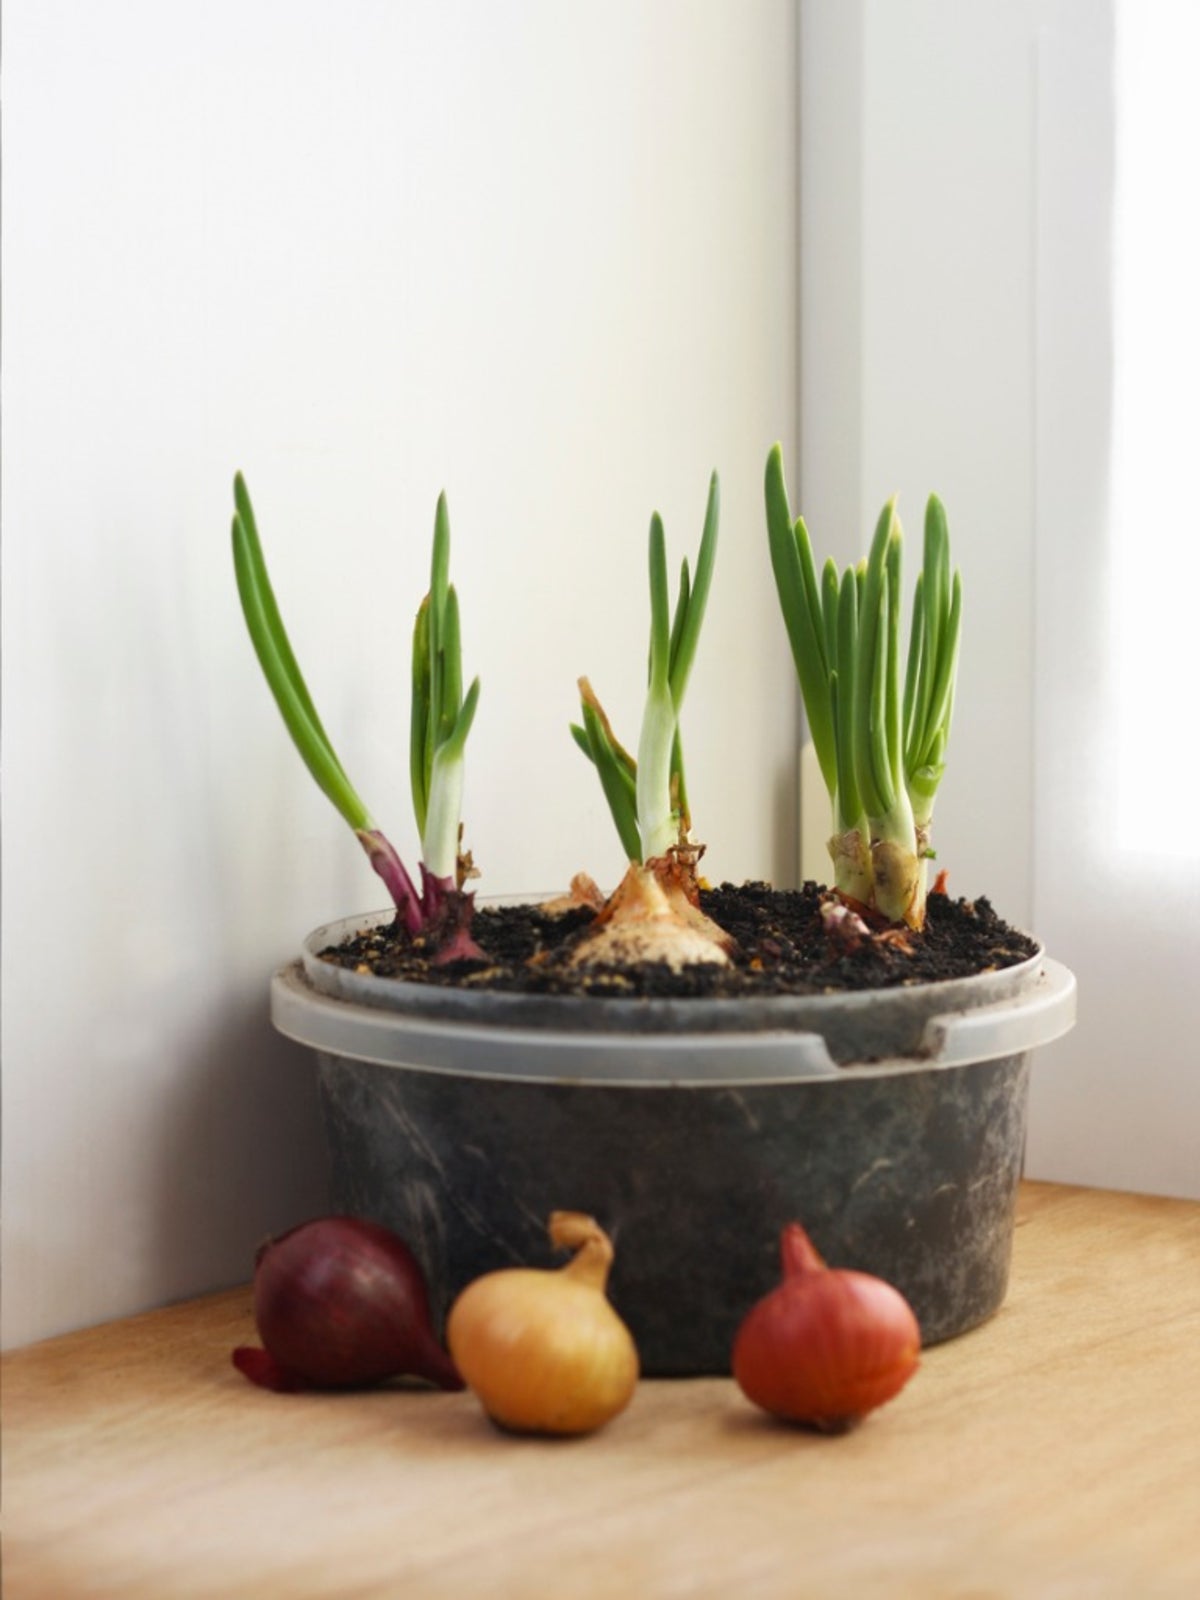 How to Properly Grow Onions in a Container